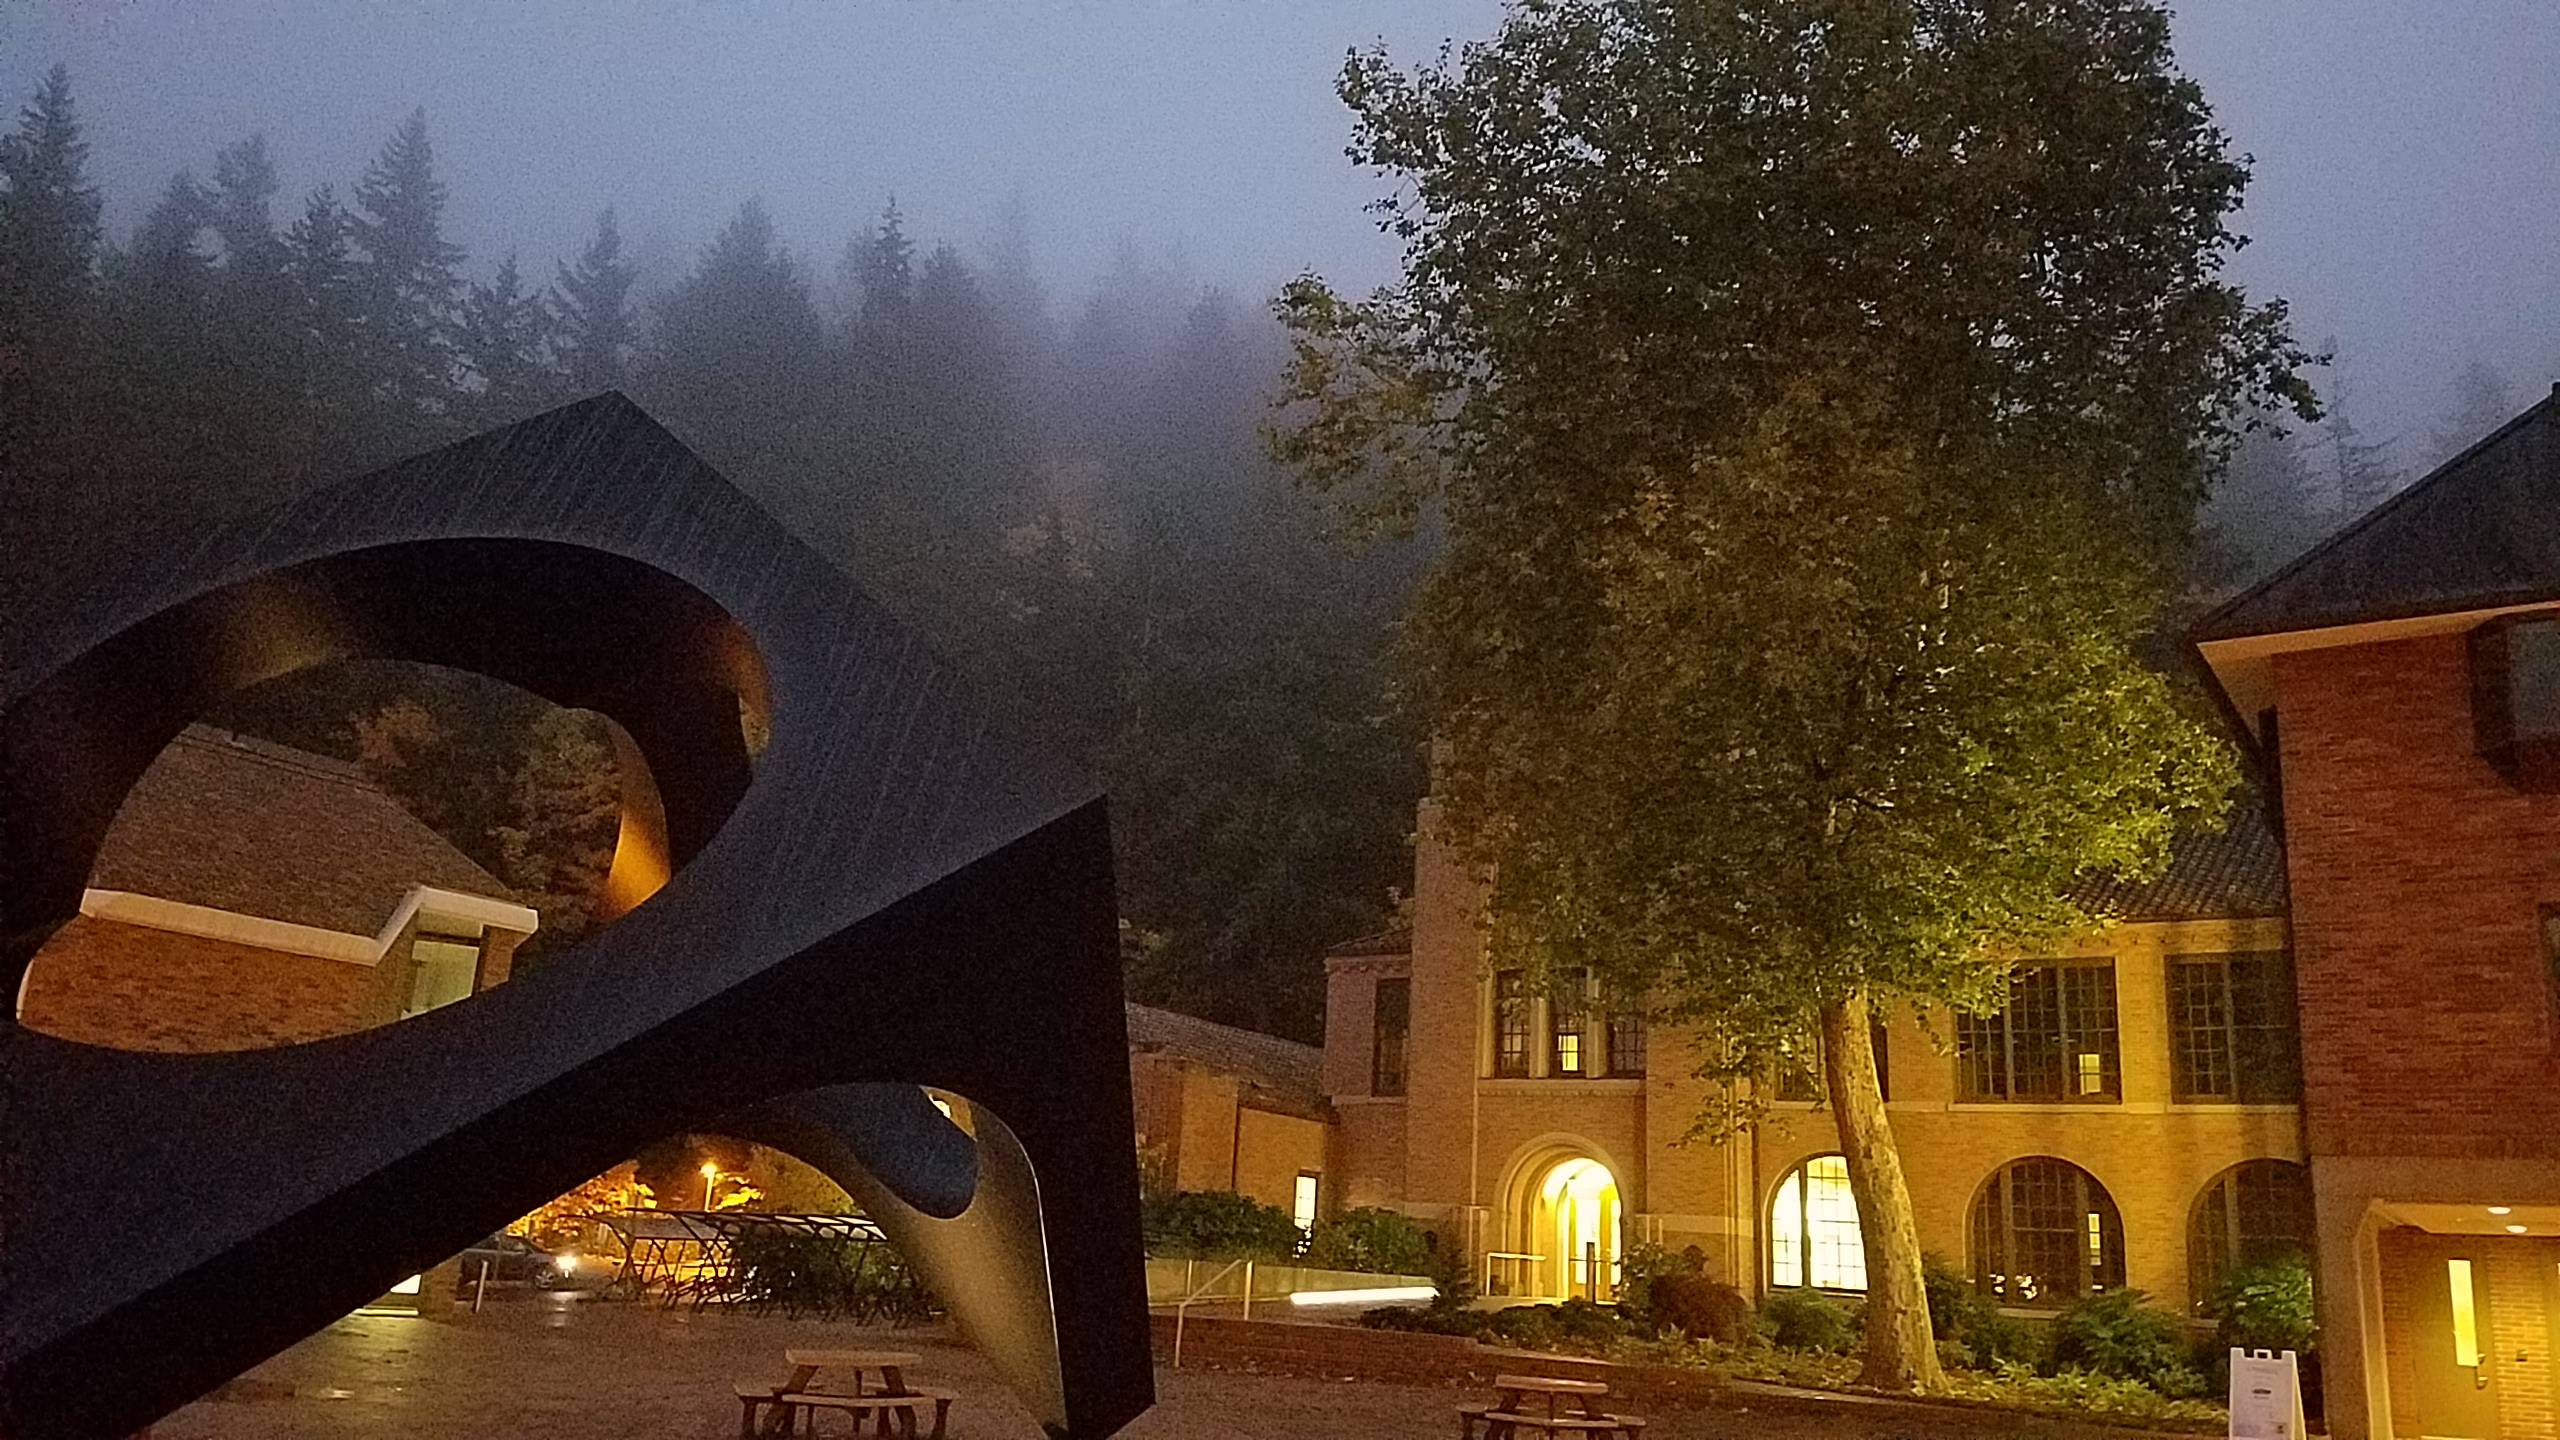 View of Miller Hall in the fog